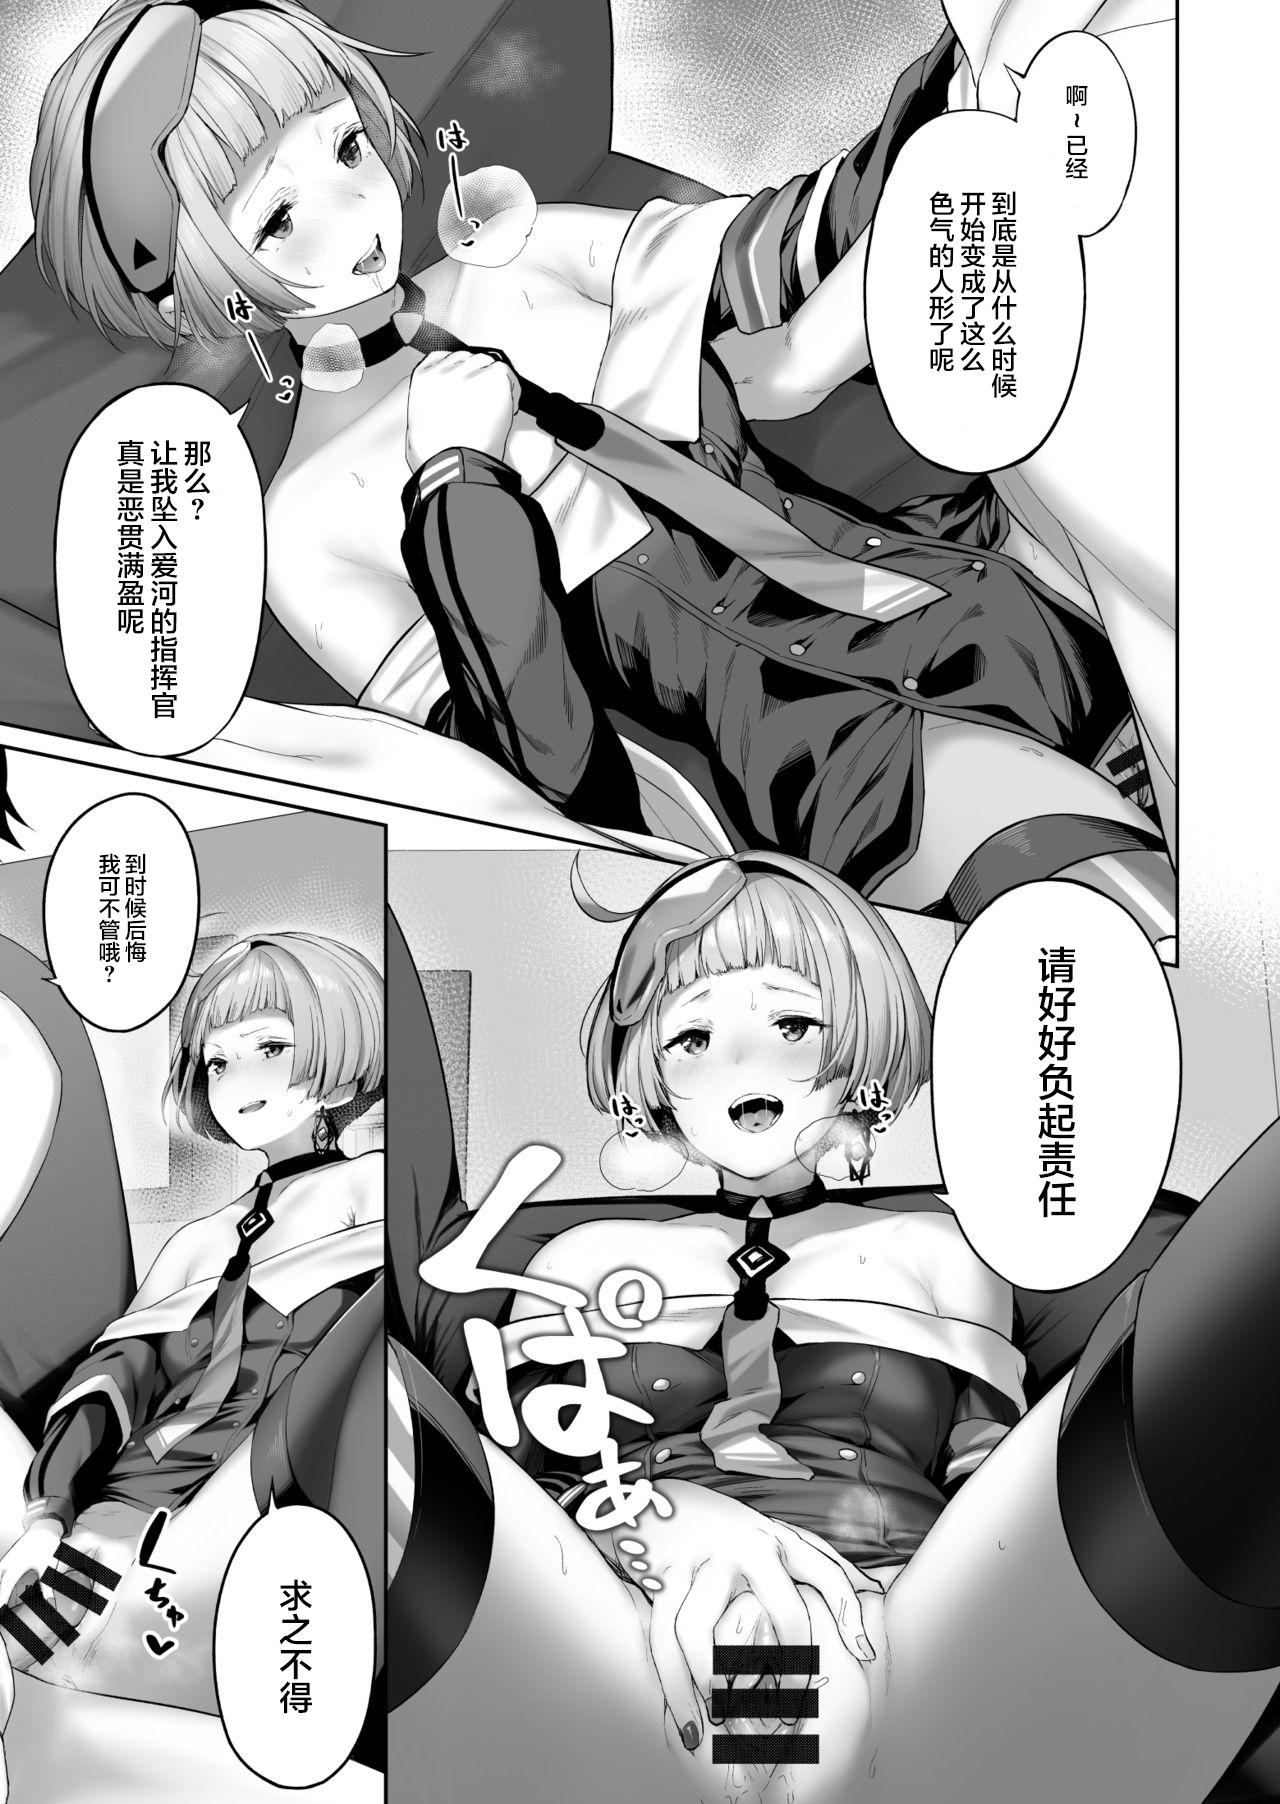 Huge Boobs Zas M21 - Girls frontline Reverse - Page 9